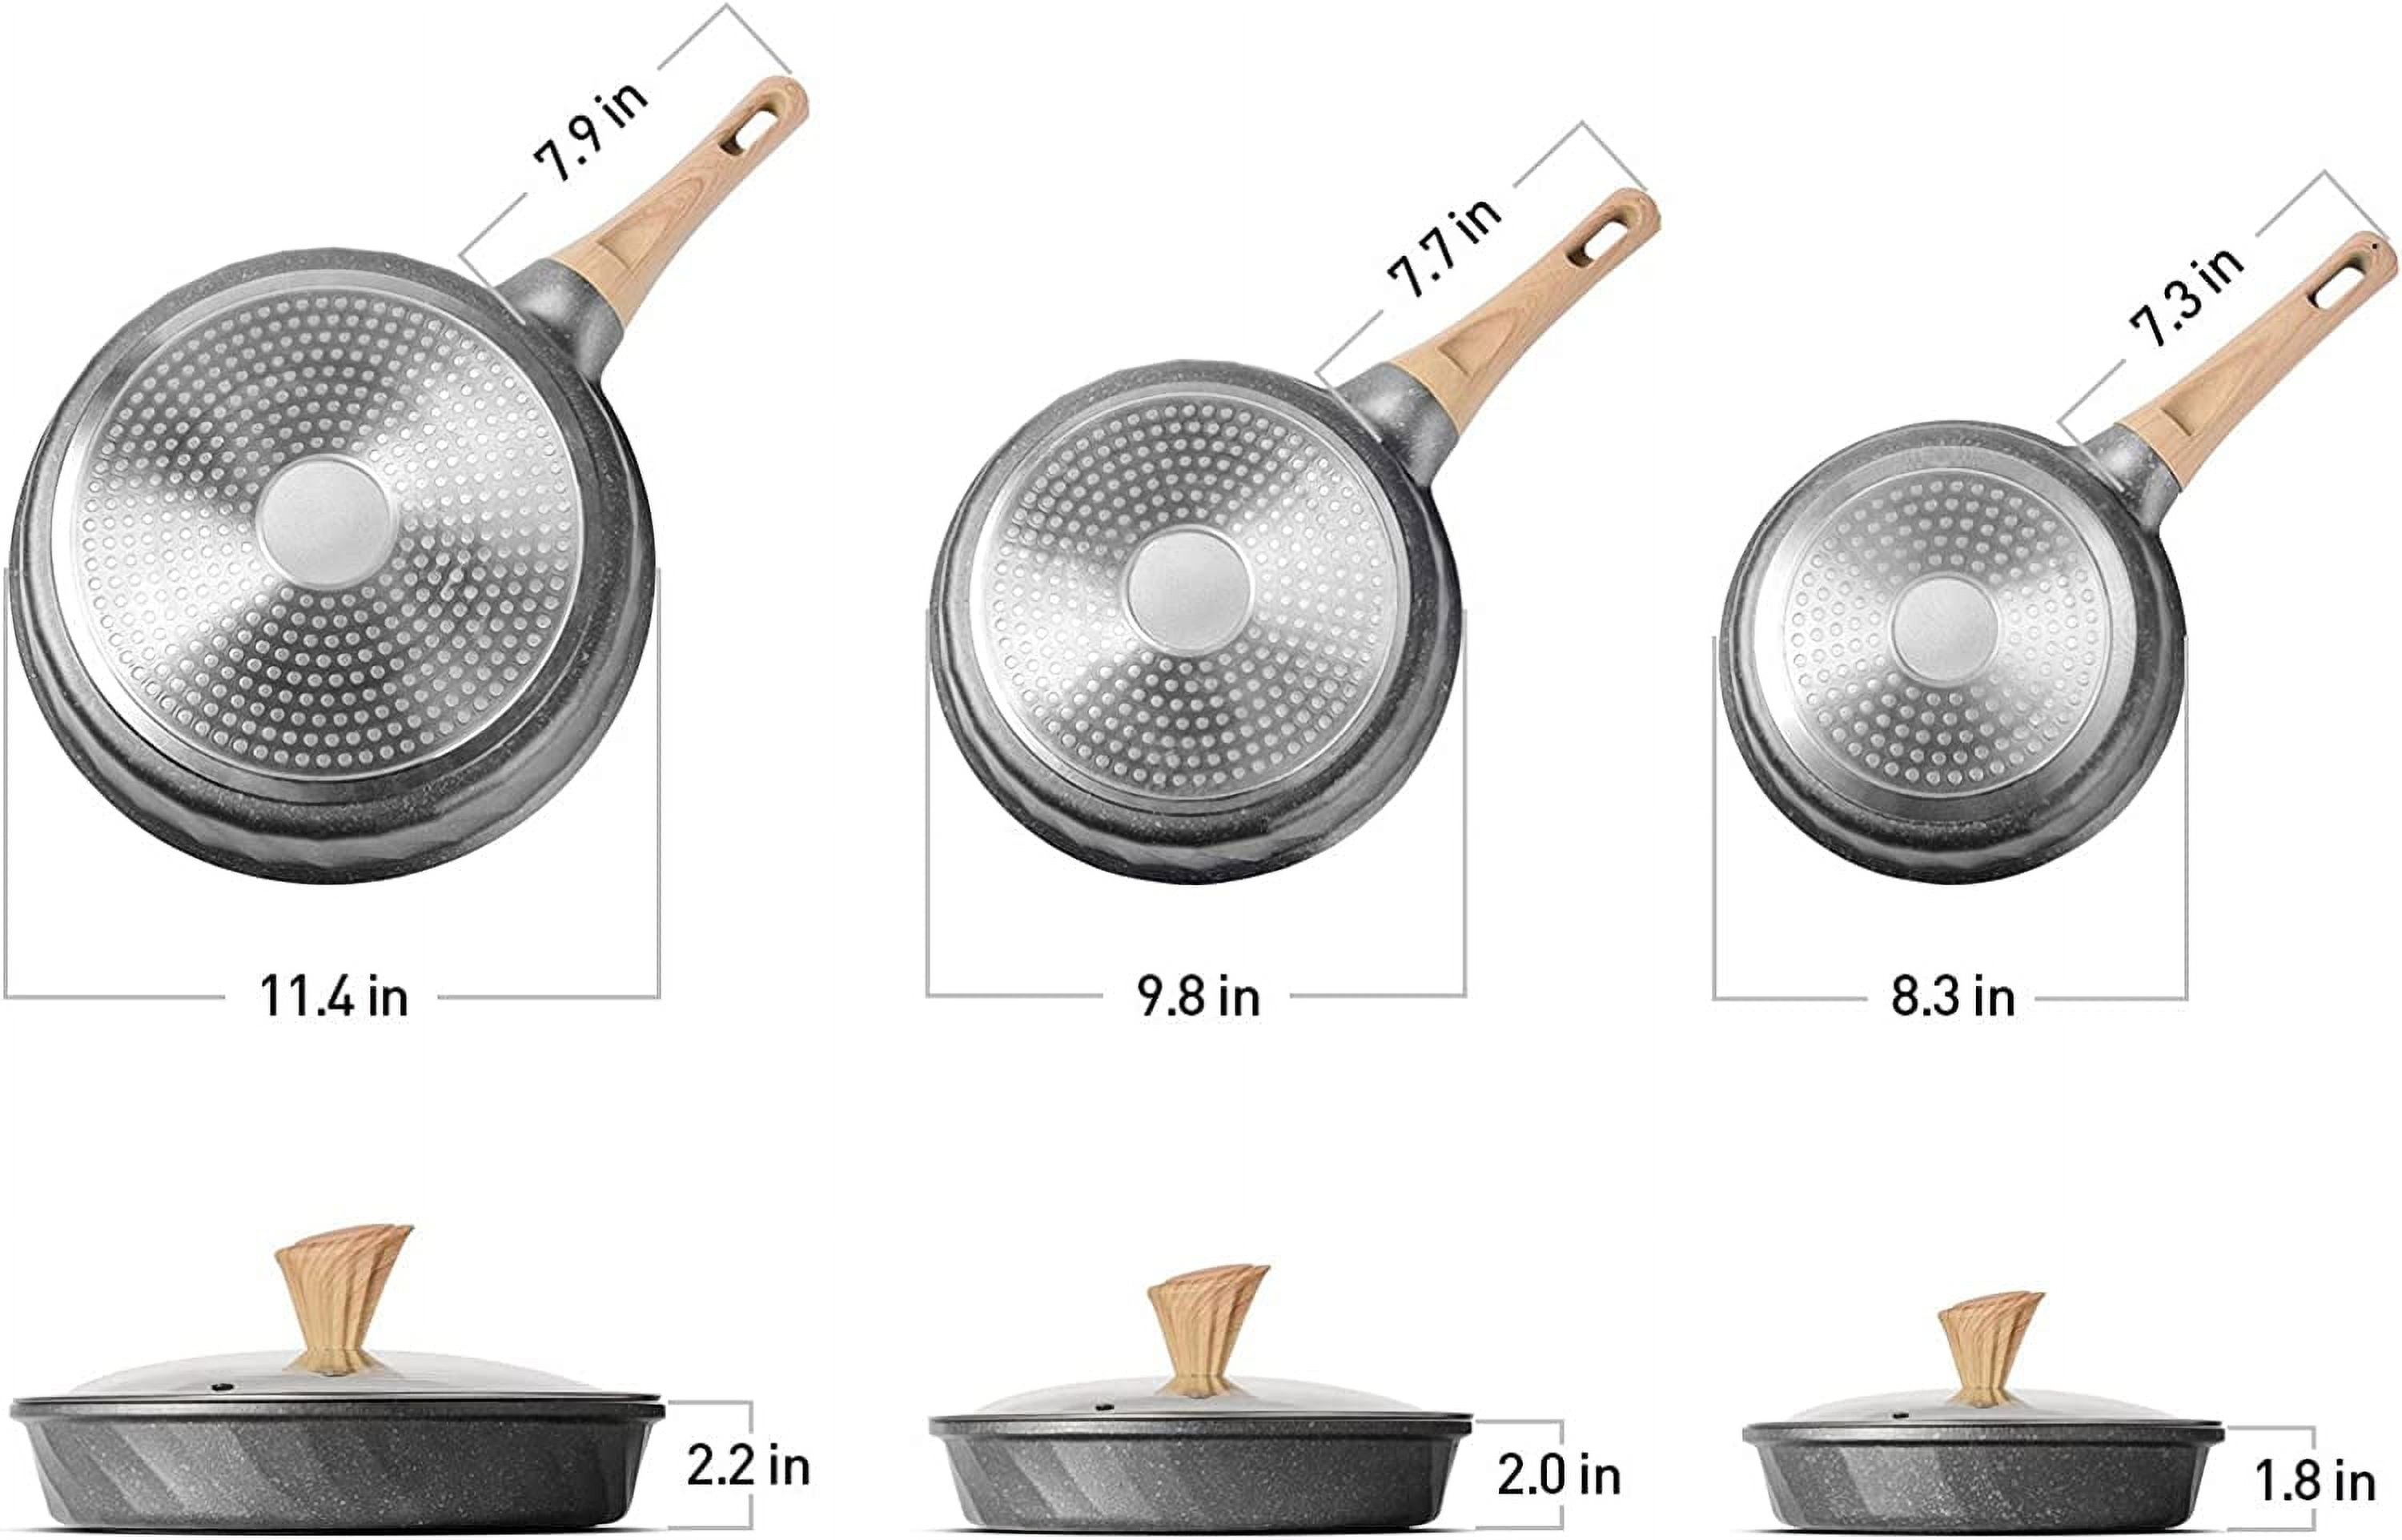  SODAY 12pcs Pots and Pans Set Non Stick Kitchen Cookware Sets  Induction Cookware Nonstick Granite Cooking Set with Frying Pans, Saucepans,  Steamer Silicone Shovel Spoon & Tongs (Black) : Home 